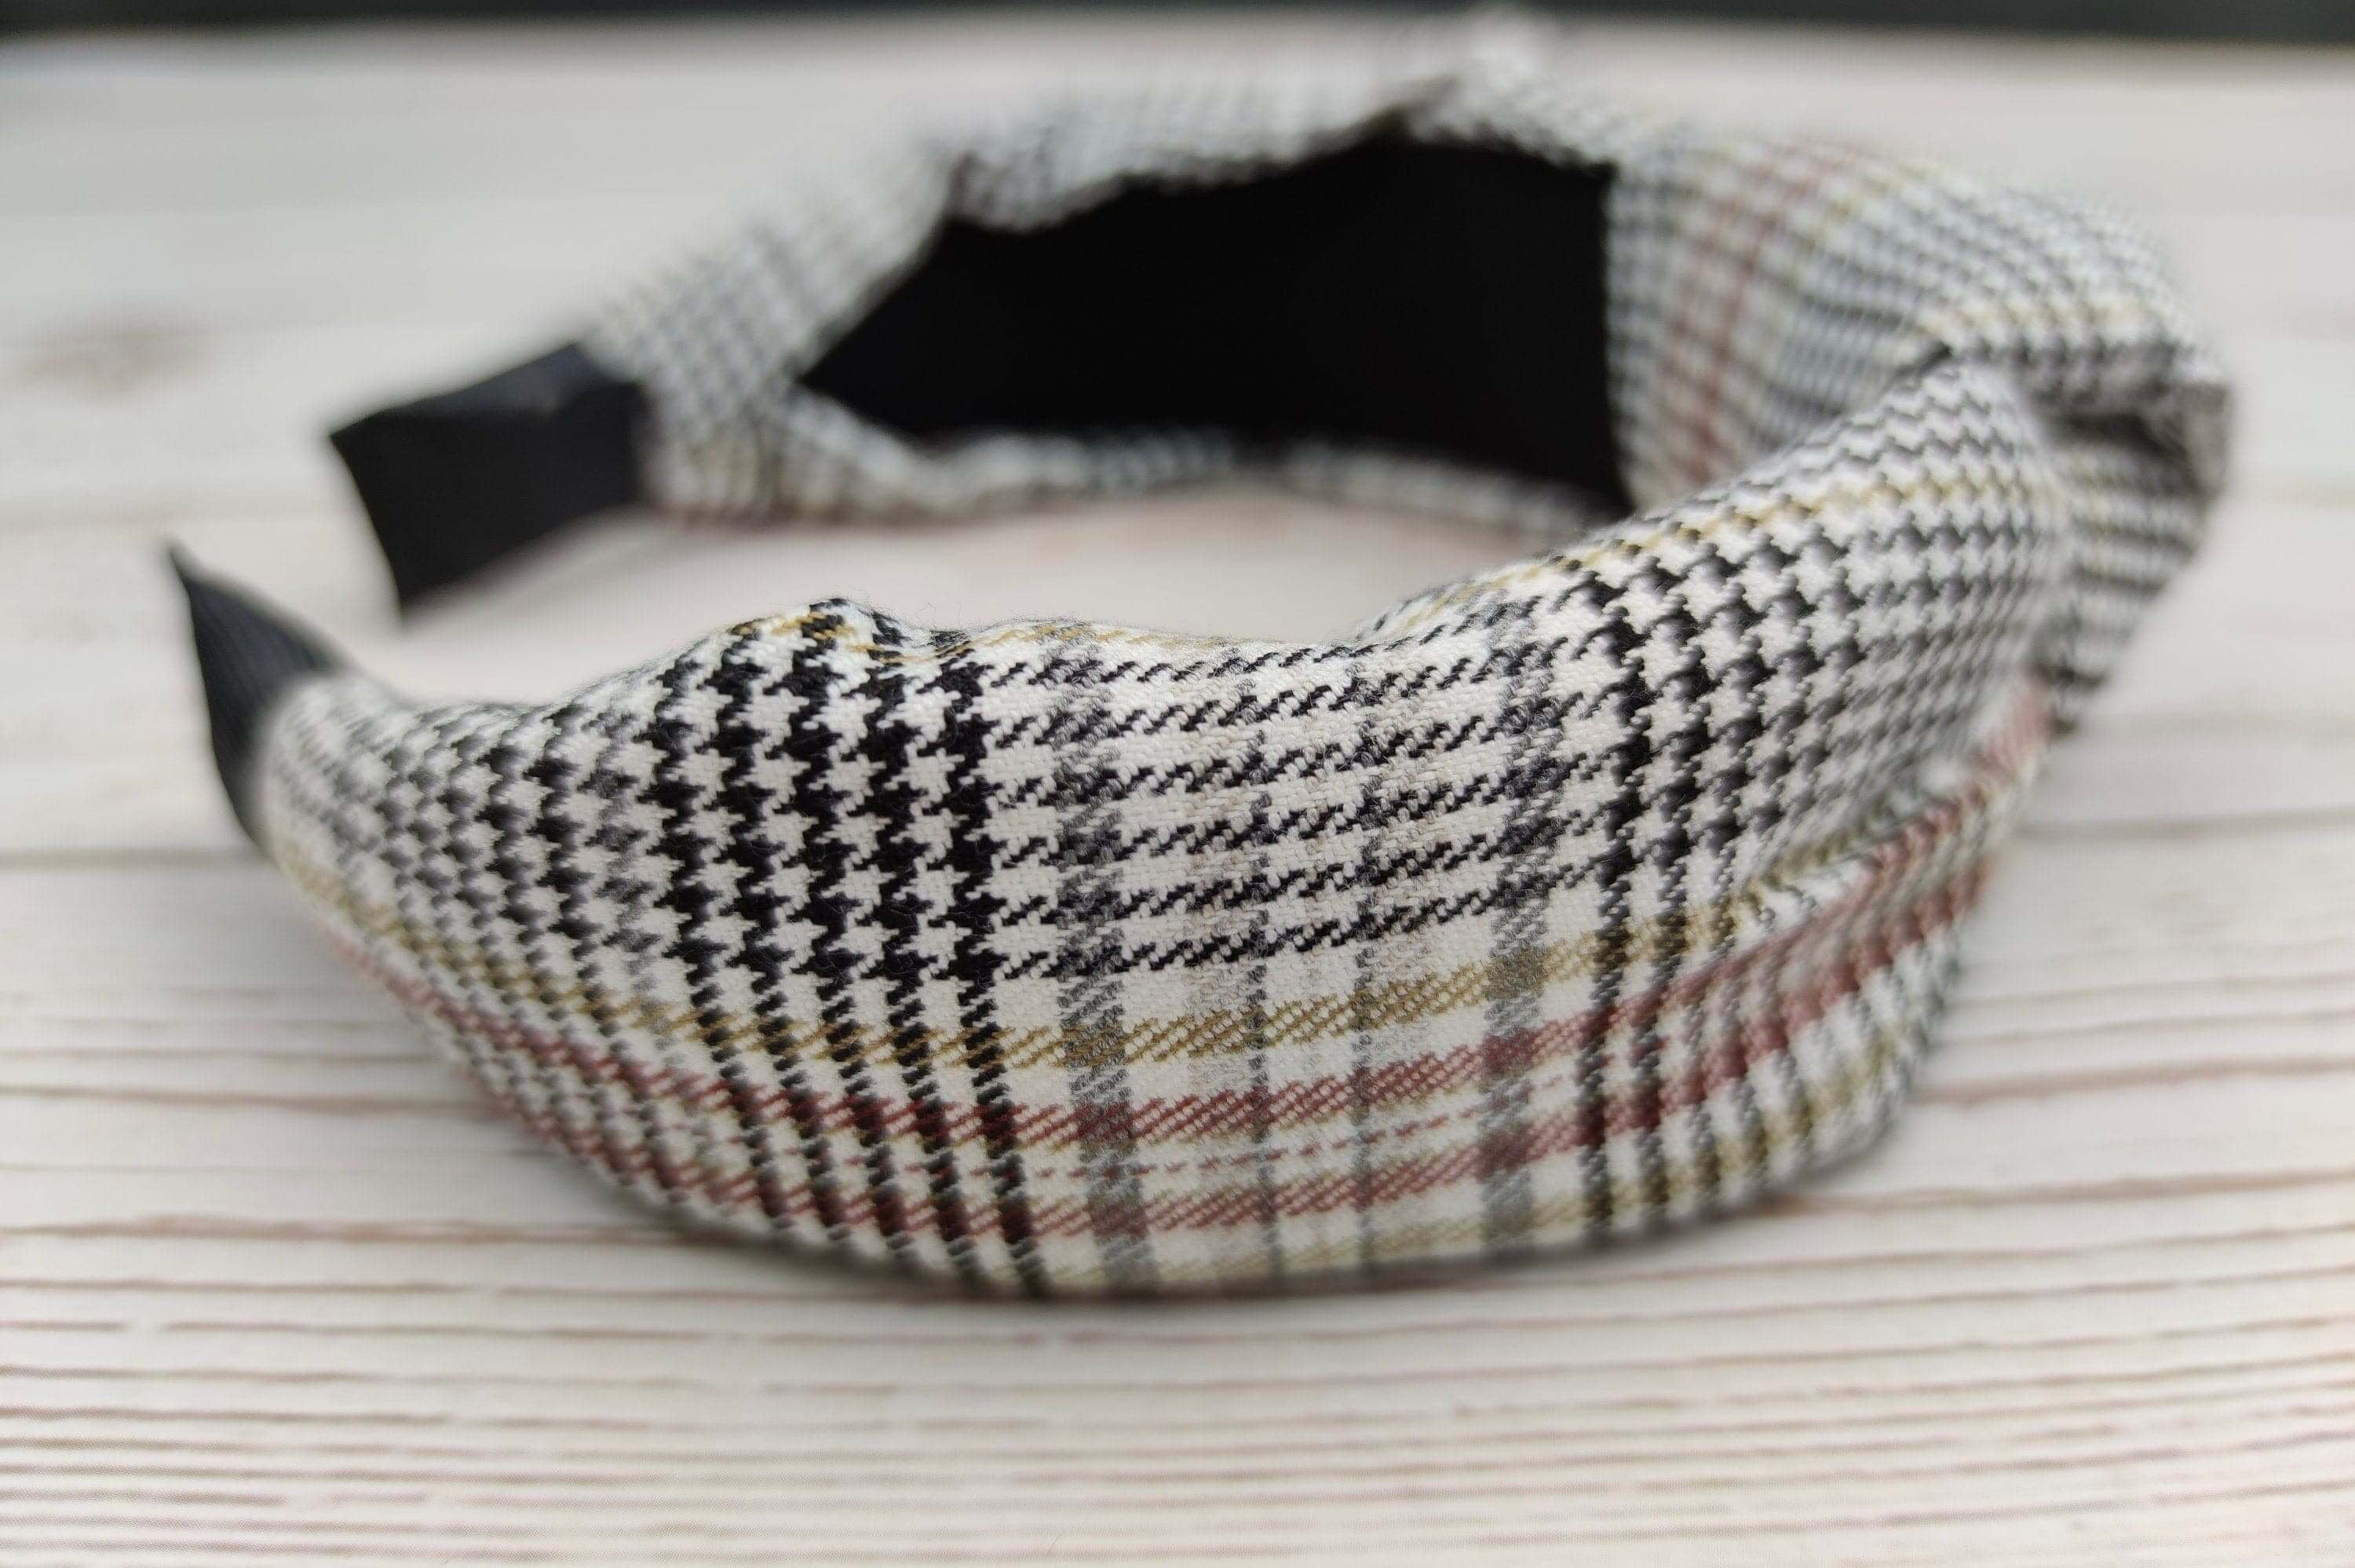 Looking for a fashionable and unique headband? Check out our wide variety of twist headbands! These versatile accessories are perfect for all women, from college girls to fashionistas.